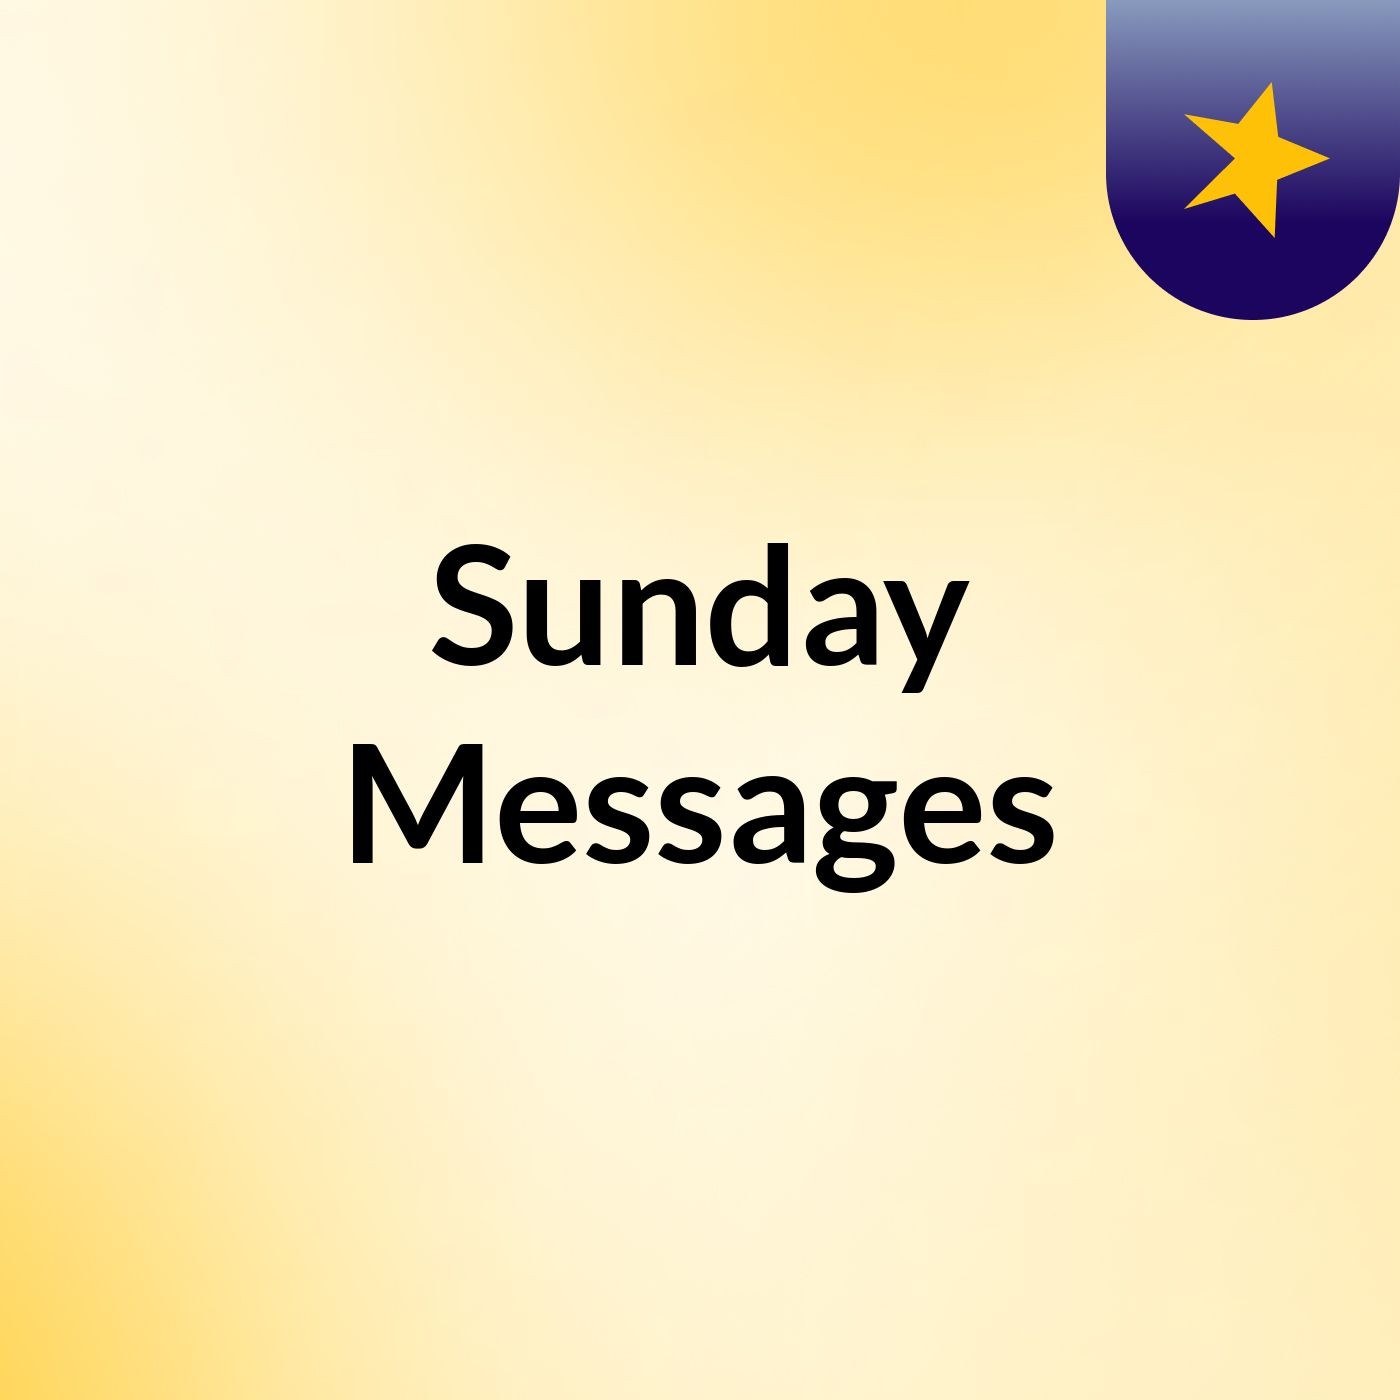 Sunday Messages